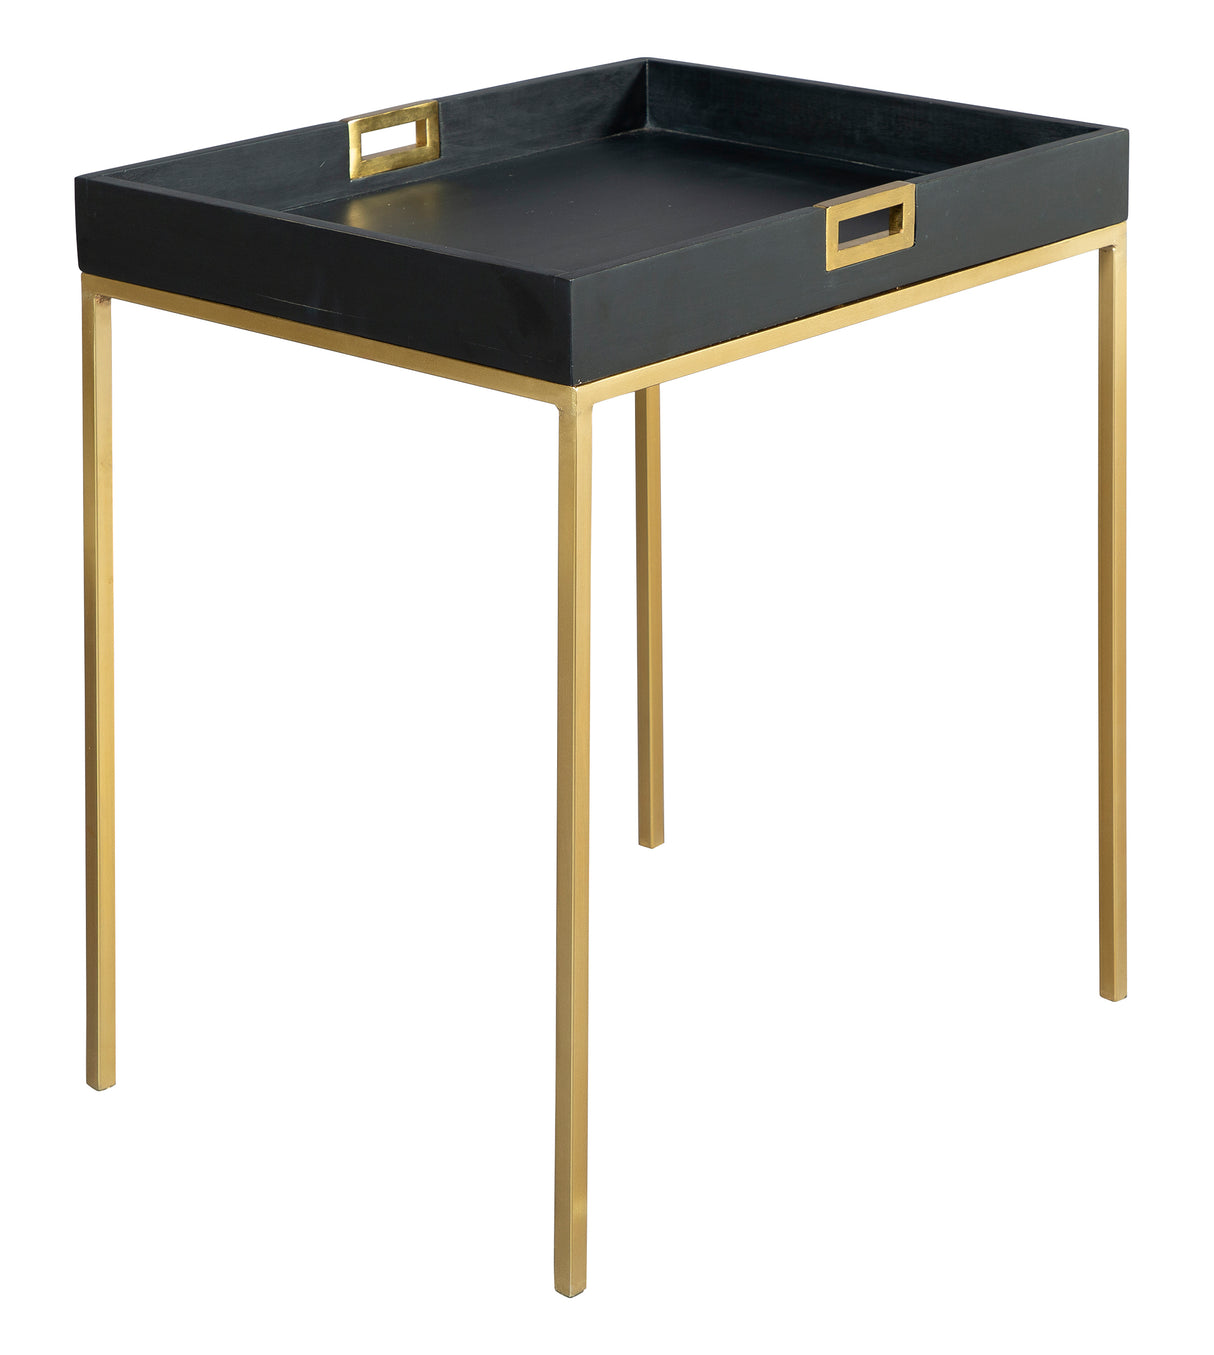 Hekman 28606 Accents 22in. x 18in. x 26.5in. Accent Table